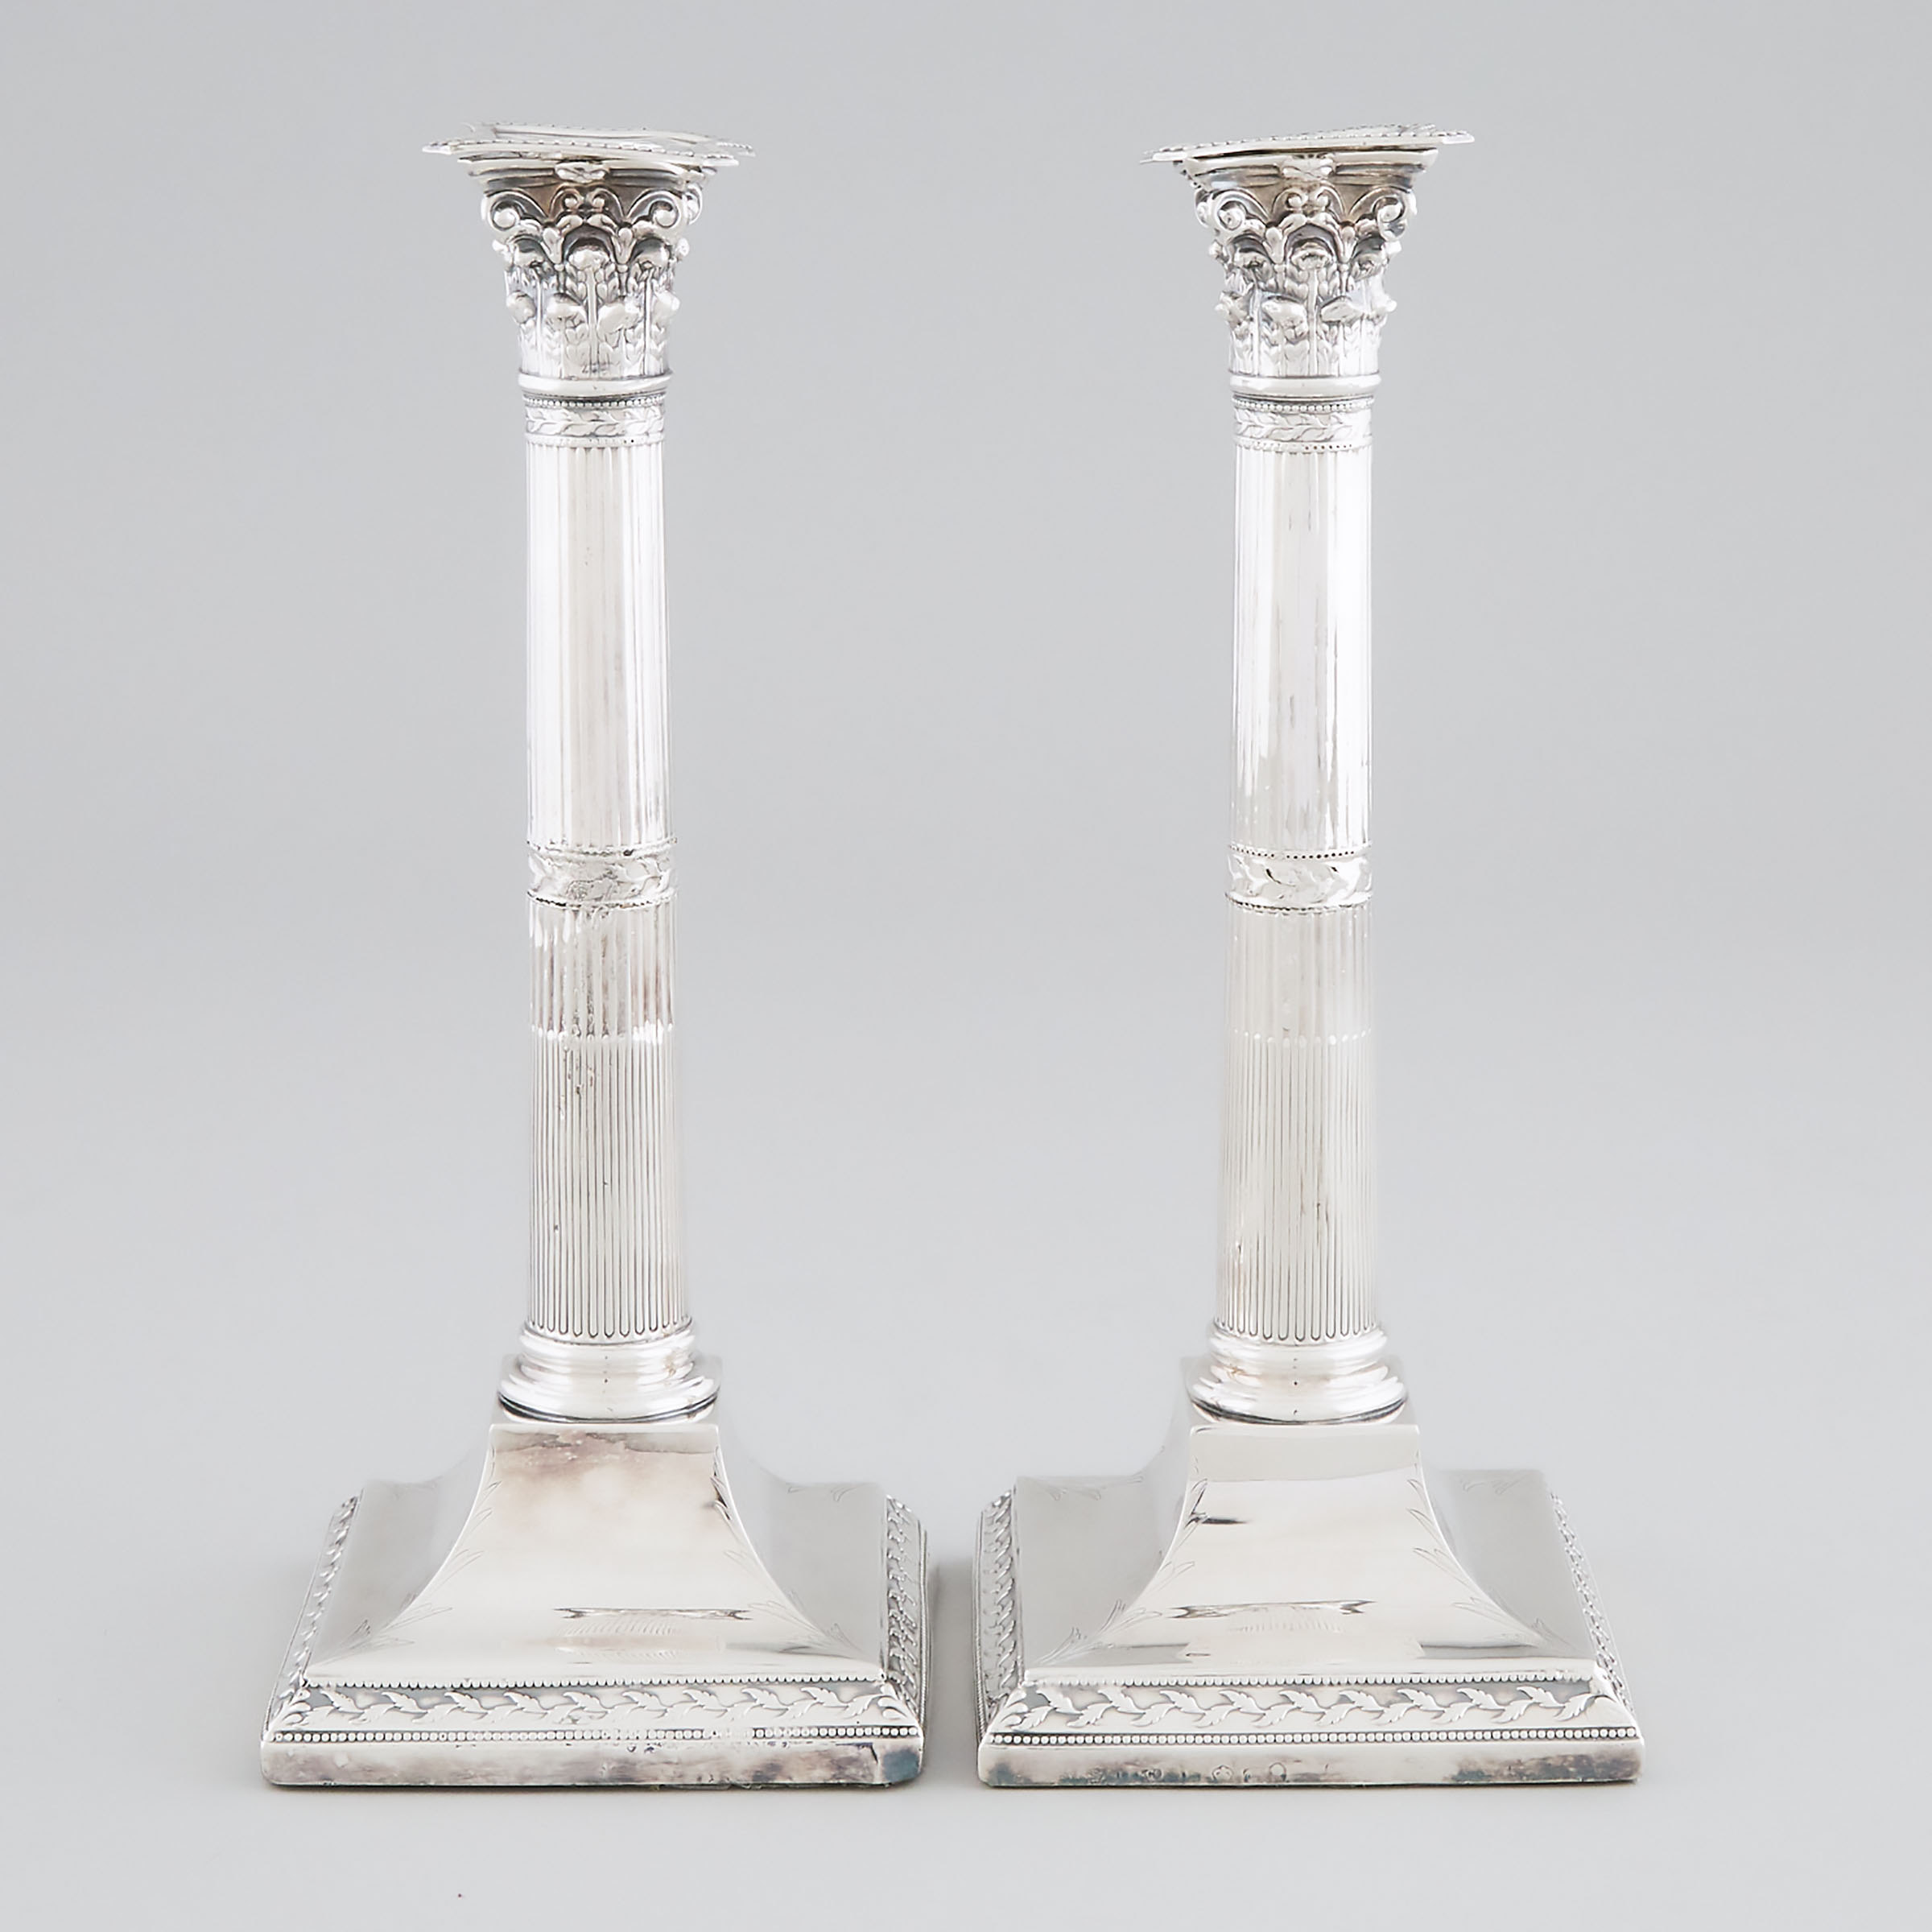 Pair of George III Silver Table Candlesticks, John Parsons & Co., Sheffield, 1787